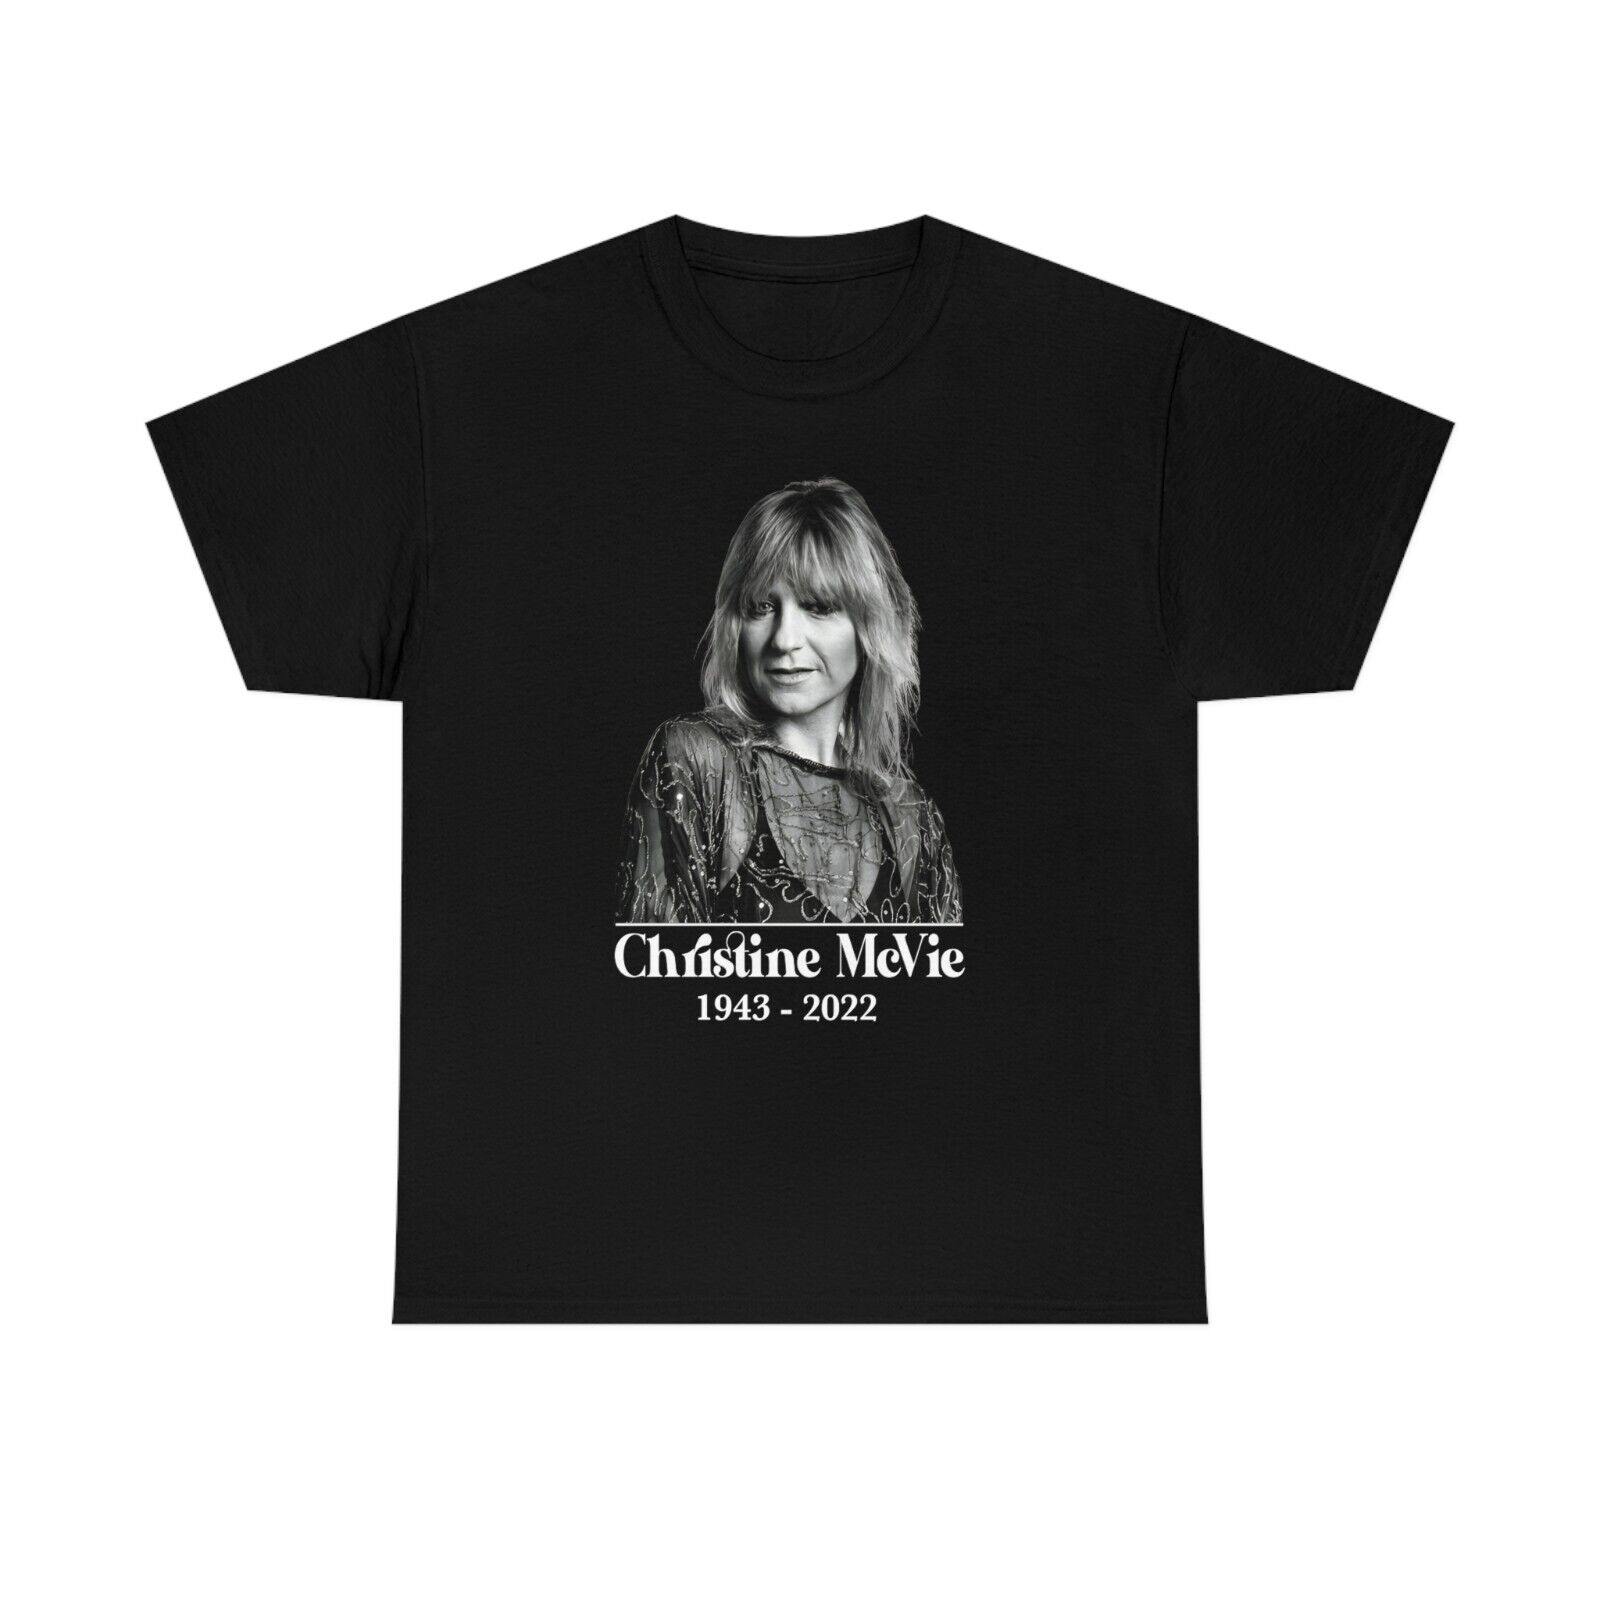 Christine McVie Shirt, Thank You For The Memories (S - 5XL) Unisex Tee